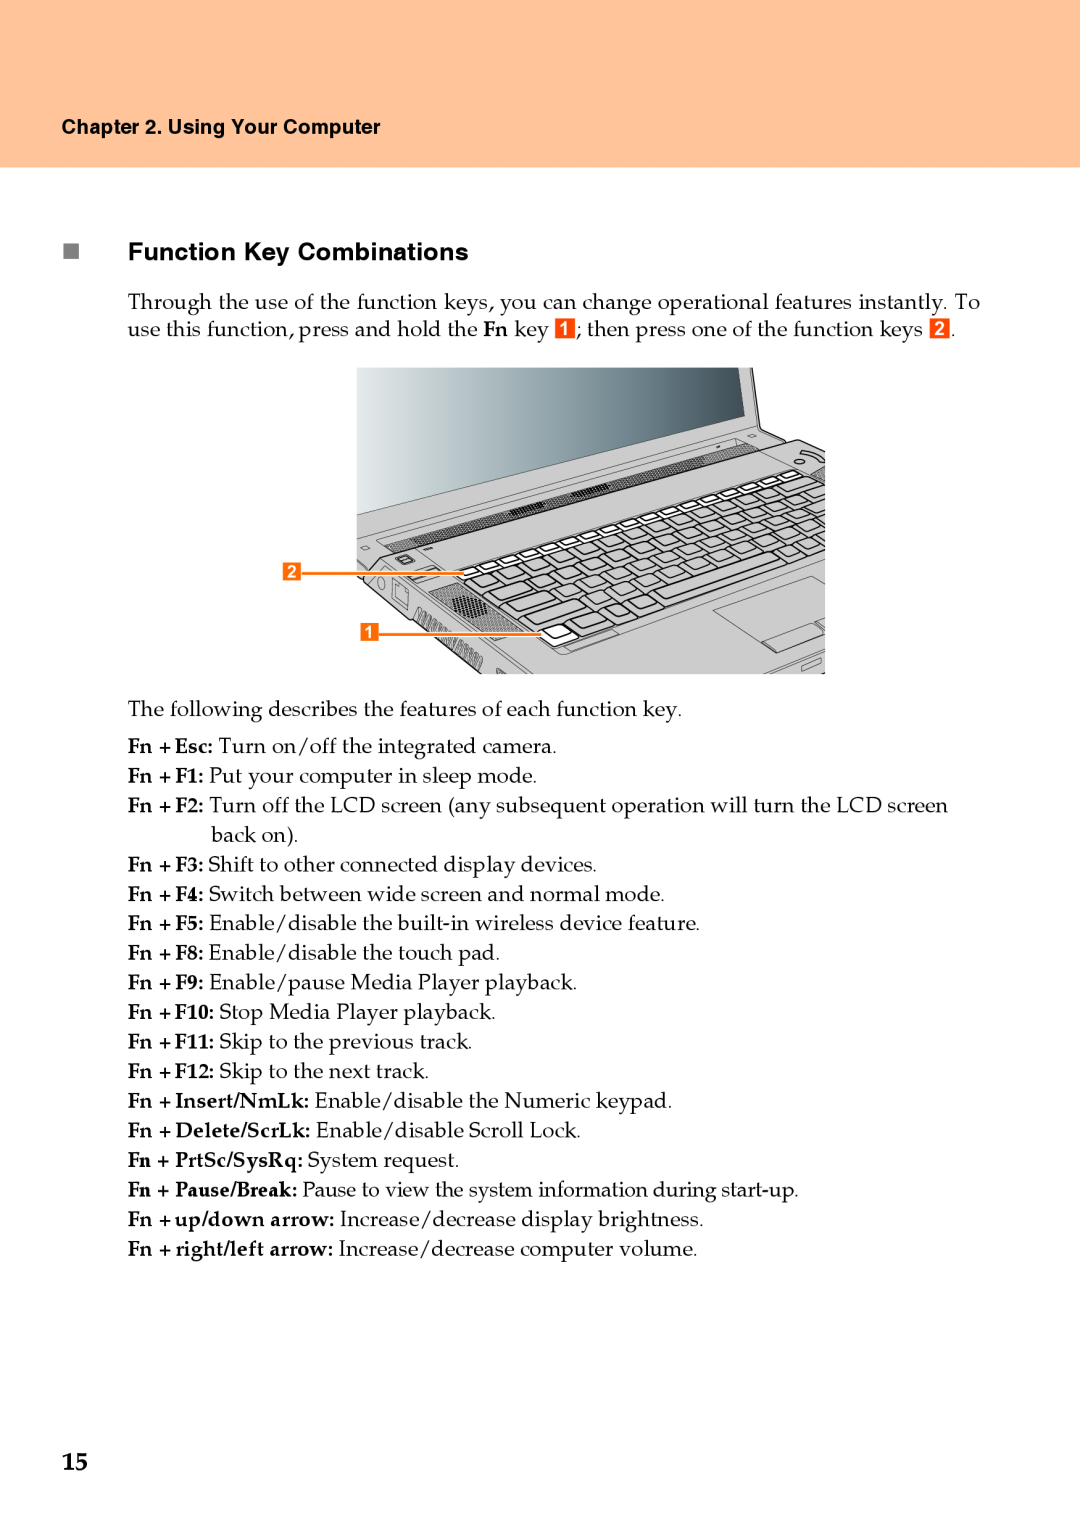 Lenovo Y510 warranty „ Function Key Combinations, Using Your Computer, Fn + PrtSc/SysRq System request 